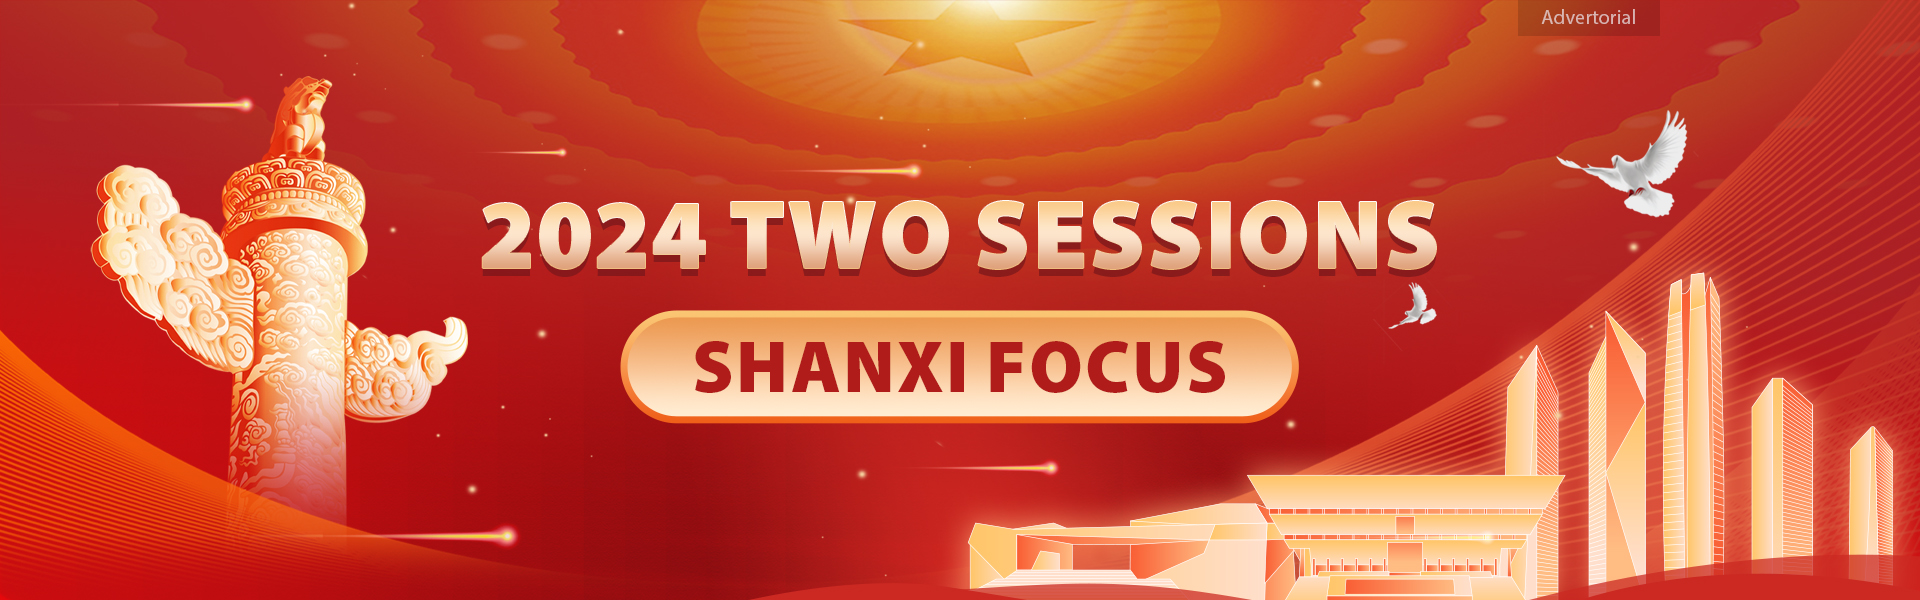 2024 Two Sessions – Shanxi Focus